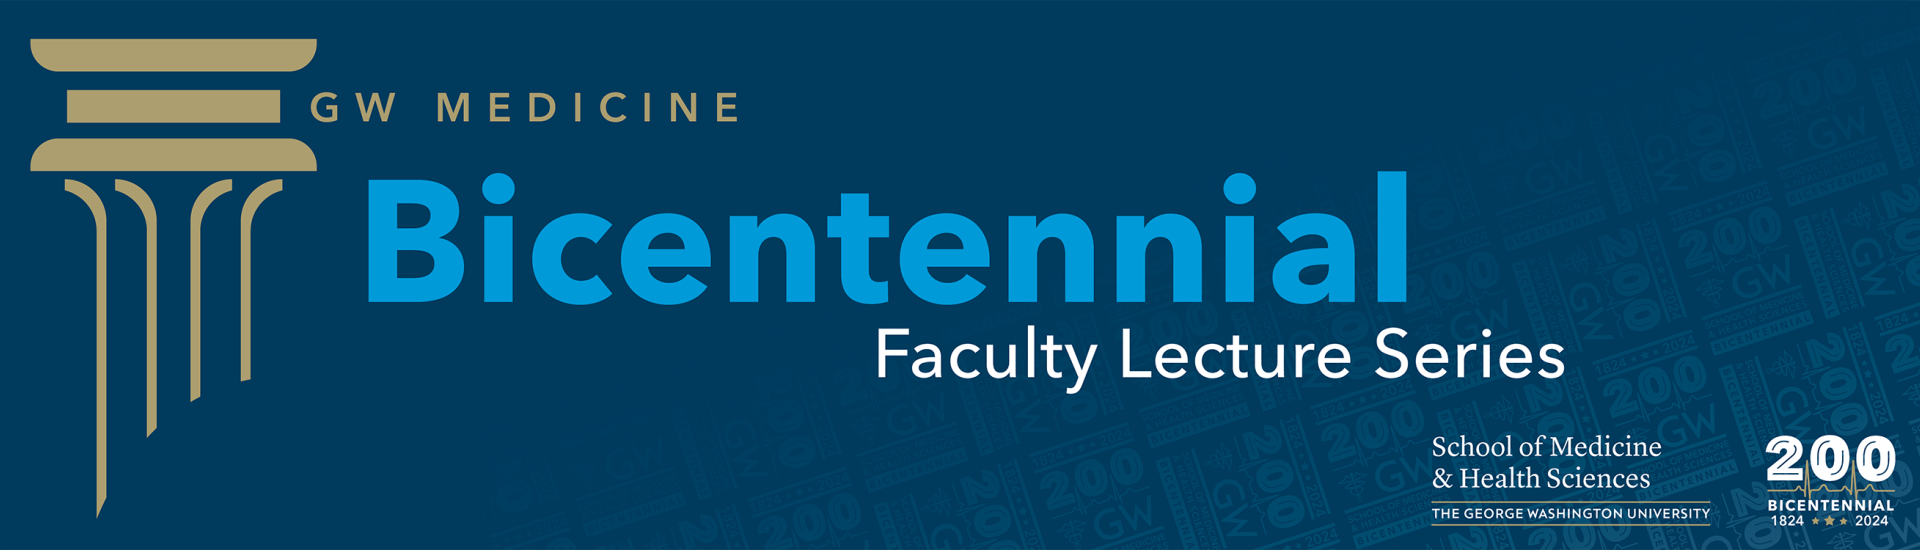 Bicentennial Faculty Lecture Series